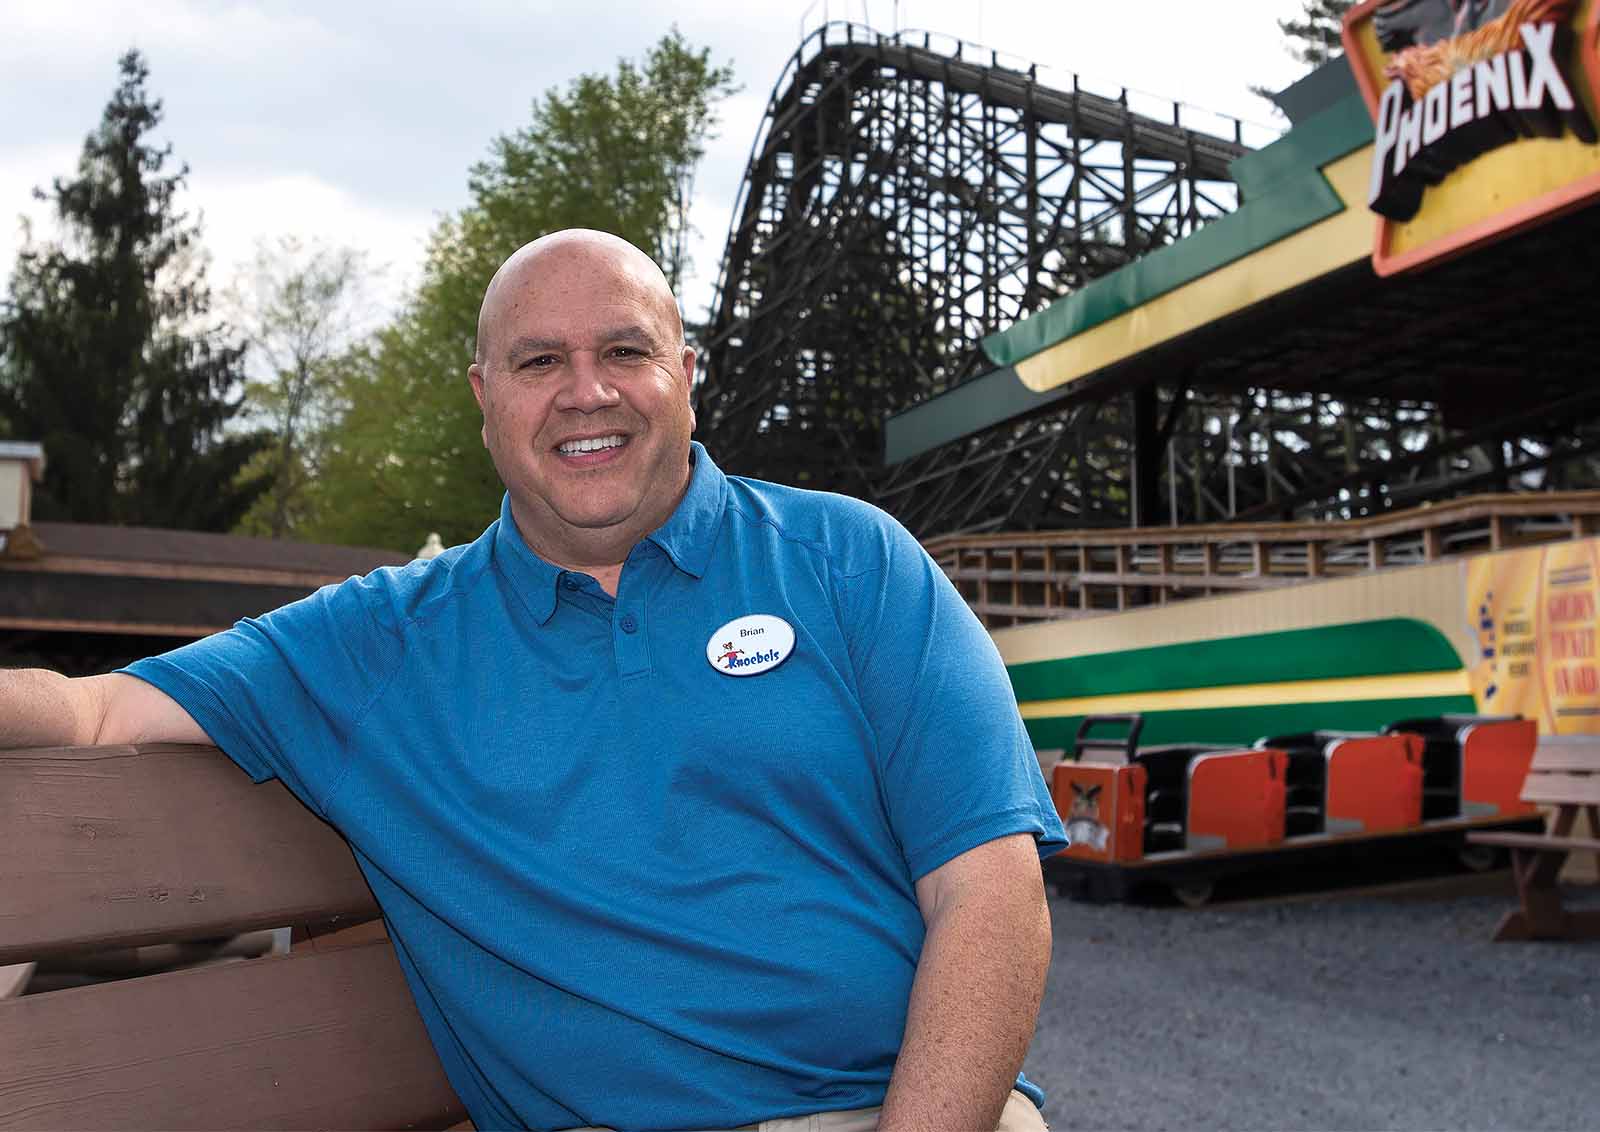 Brian Knoebel sits on a park bench in his family-owned amusement park in Elysburg, PA.